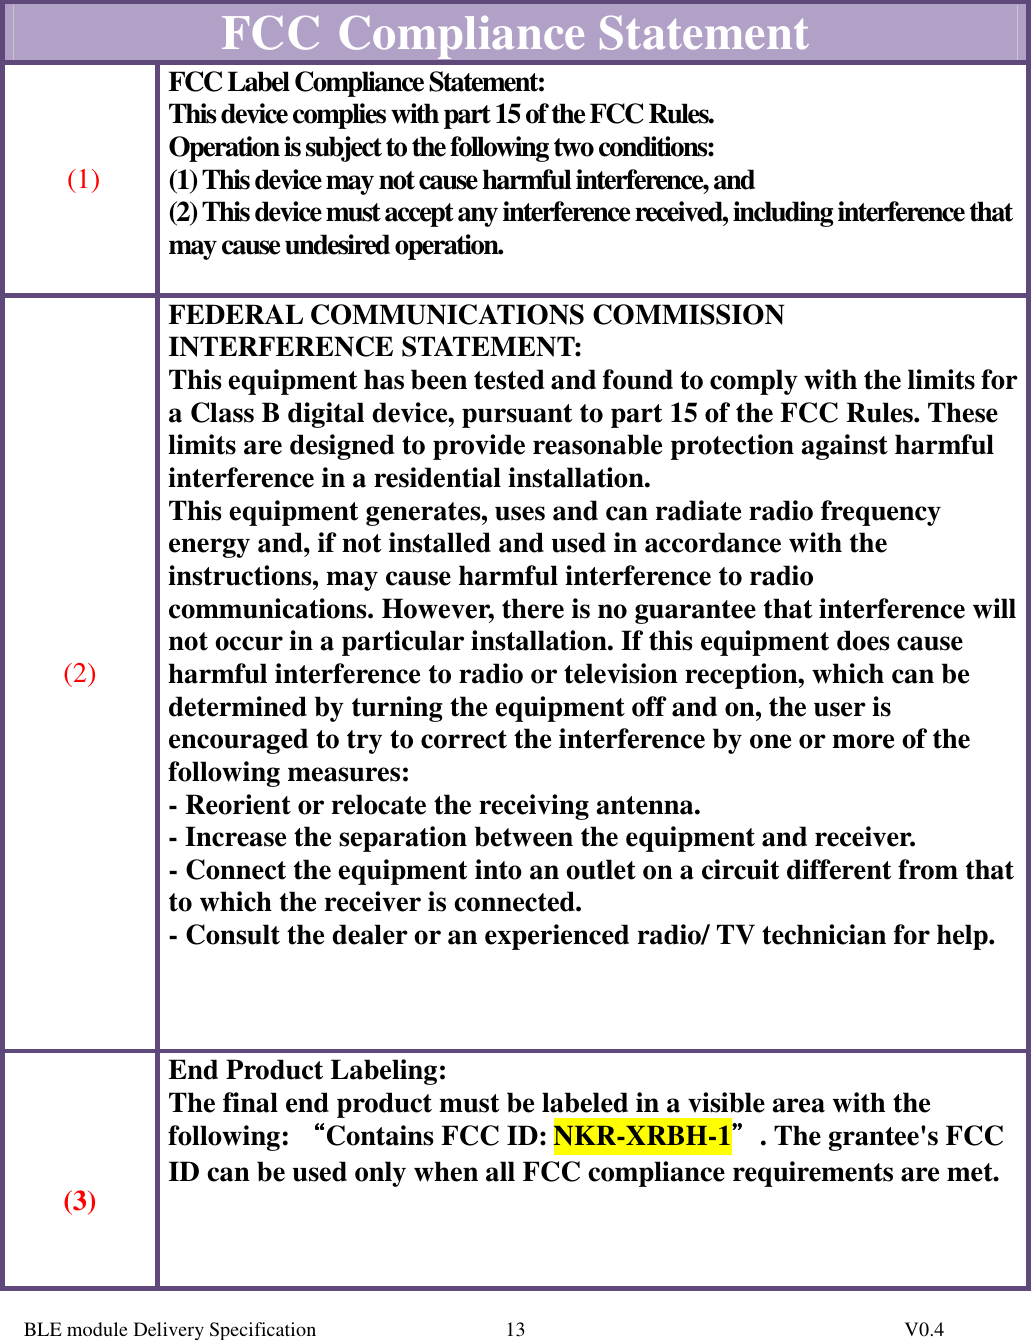  BLE module Delivery Specification          V0.4 13  FCC   Compliance Statement  (1) FCC Label Compliance Statement: This device complies with part 15 of the FCC Rules.  Operation is subject to the following two conditions:  (1) This device may not cause harmful interference, and  (2) This device must accept any interference received, including interference that may cause undesired operation.    (2) FEDERAL COMMUNICATIONS COMMISSION INTERFERENCE STATEMENT: This equipment has been tested and found to comply with the limits for a Class B digital device, pursuant to part 15 of the FCC Rules. These limits are designed to provide reasonable protection against harmful interference in a residential installation. This equipment generates, uses and can radiate radio frequency energy and, if not installed and used in accordance with the instructions, may cause harmful interference to radio communications. However, there is no guarantee that interference will not occur in a particular installation. If this equipment does cause harmful interference to radio or television reception, which can be determined by turning the equipment off and on, the user is encouraged to try to correct the interference by one or more of the following measures: - Reorient or relocate the receiving antenna. - Increase the separation between the equipment and receiver. - Connect the equipment into an outlet on a circuit different from that to which the receiver is connected. - Consult the dealer or an experienced radio/ TV technician for help.        (3) End Product Labeling: The final end product must be labeled in a visible area with the following: ““““Contains FCC ID: NKR-XRBH-1””””. The grantee&apos;s FCC ID can be used only when all FCC compliance requirements are met.    